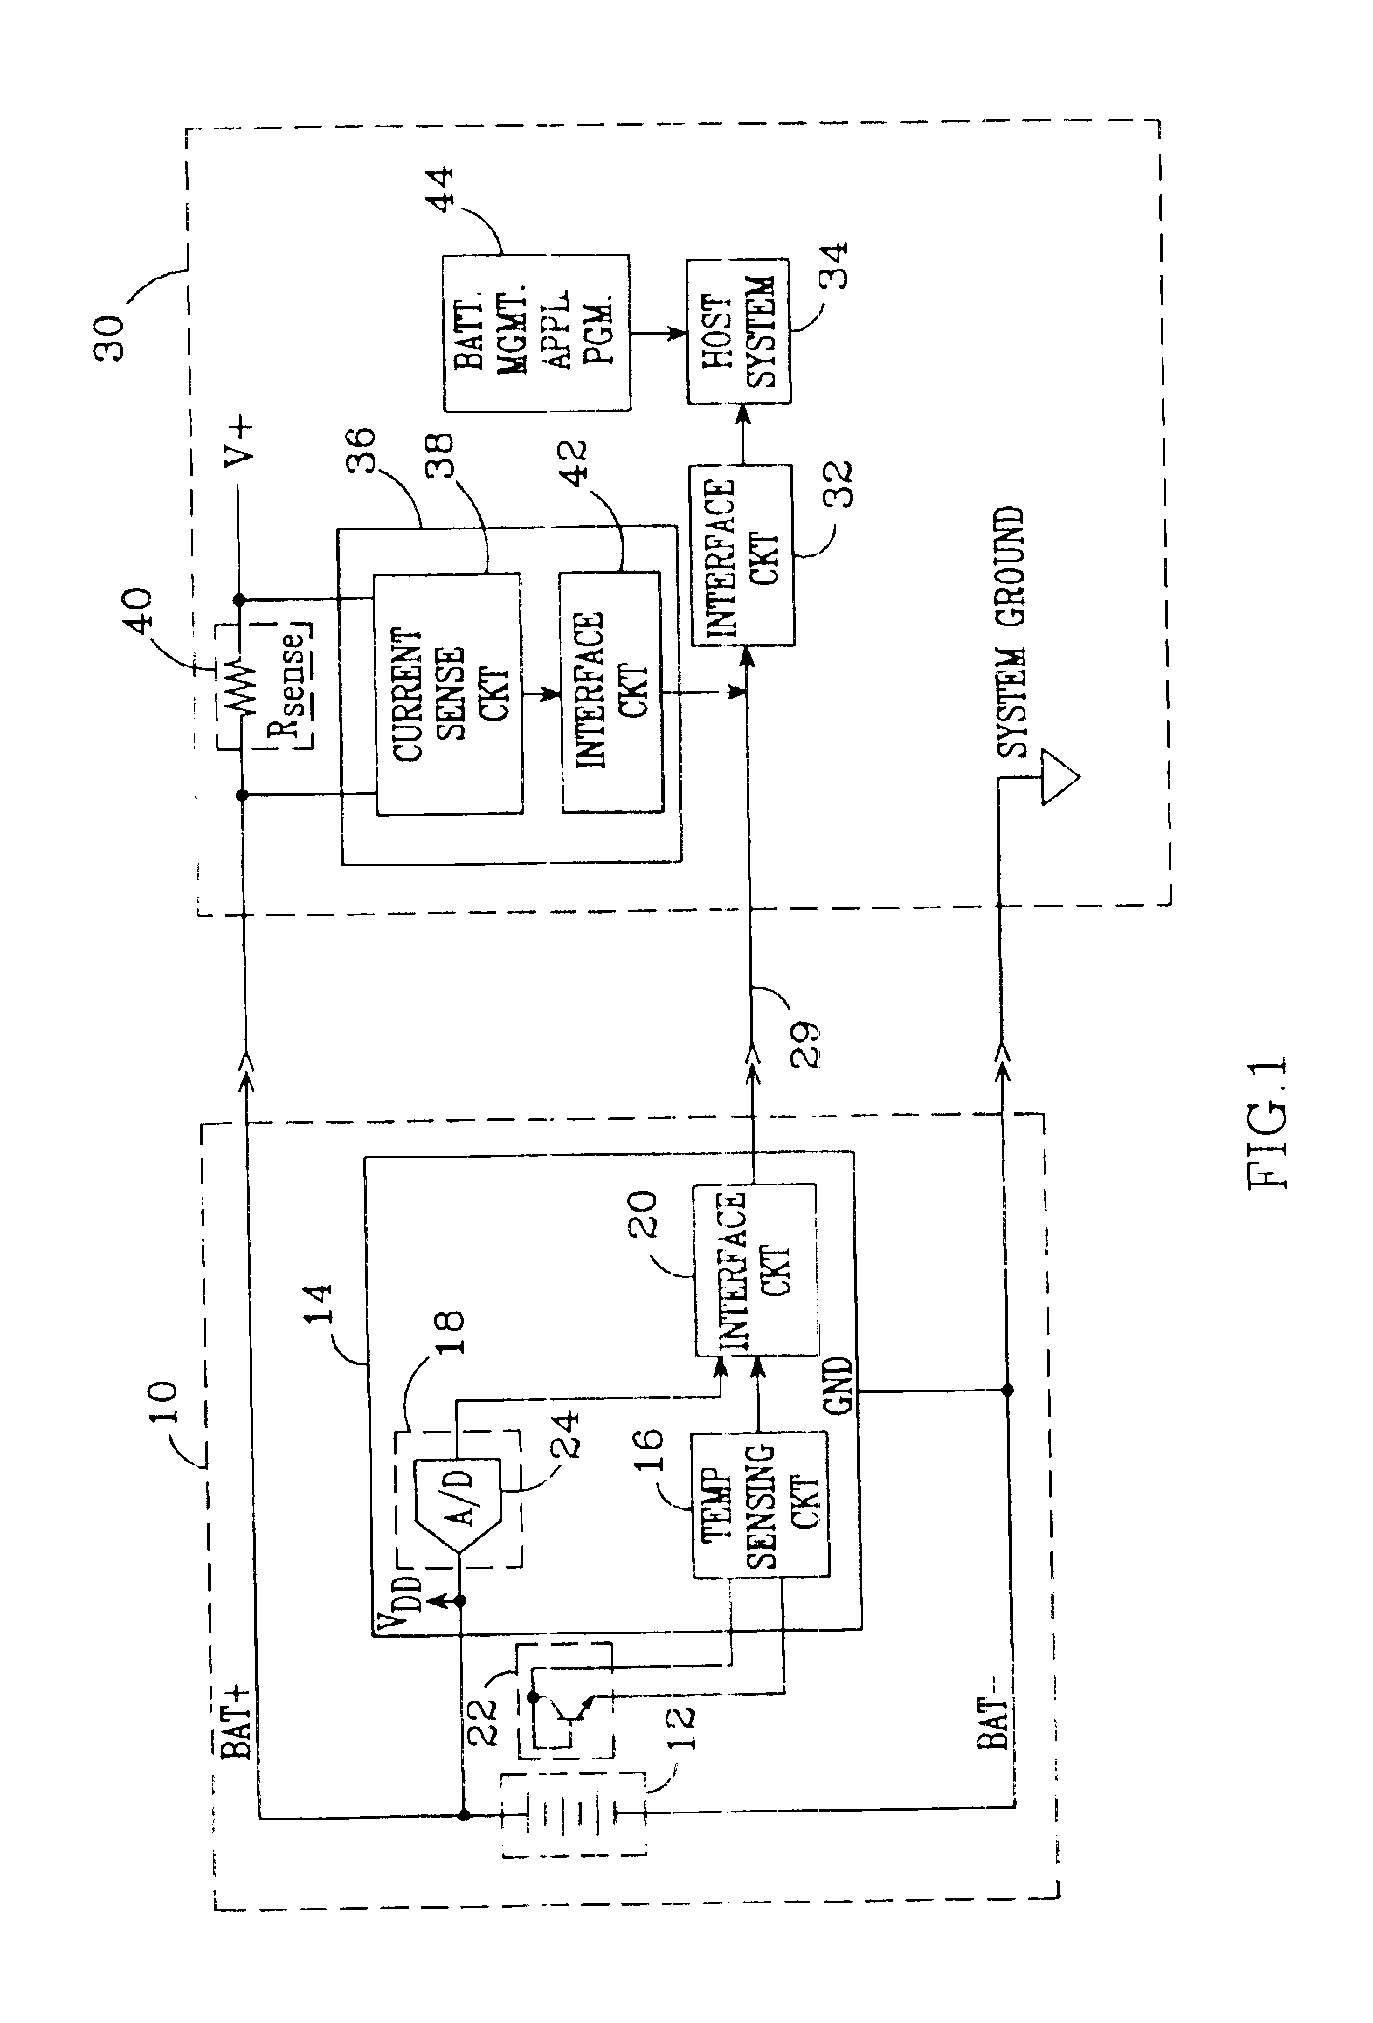 System and method for battery management using host processing